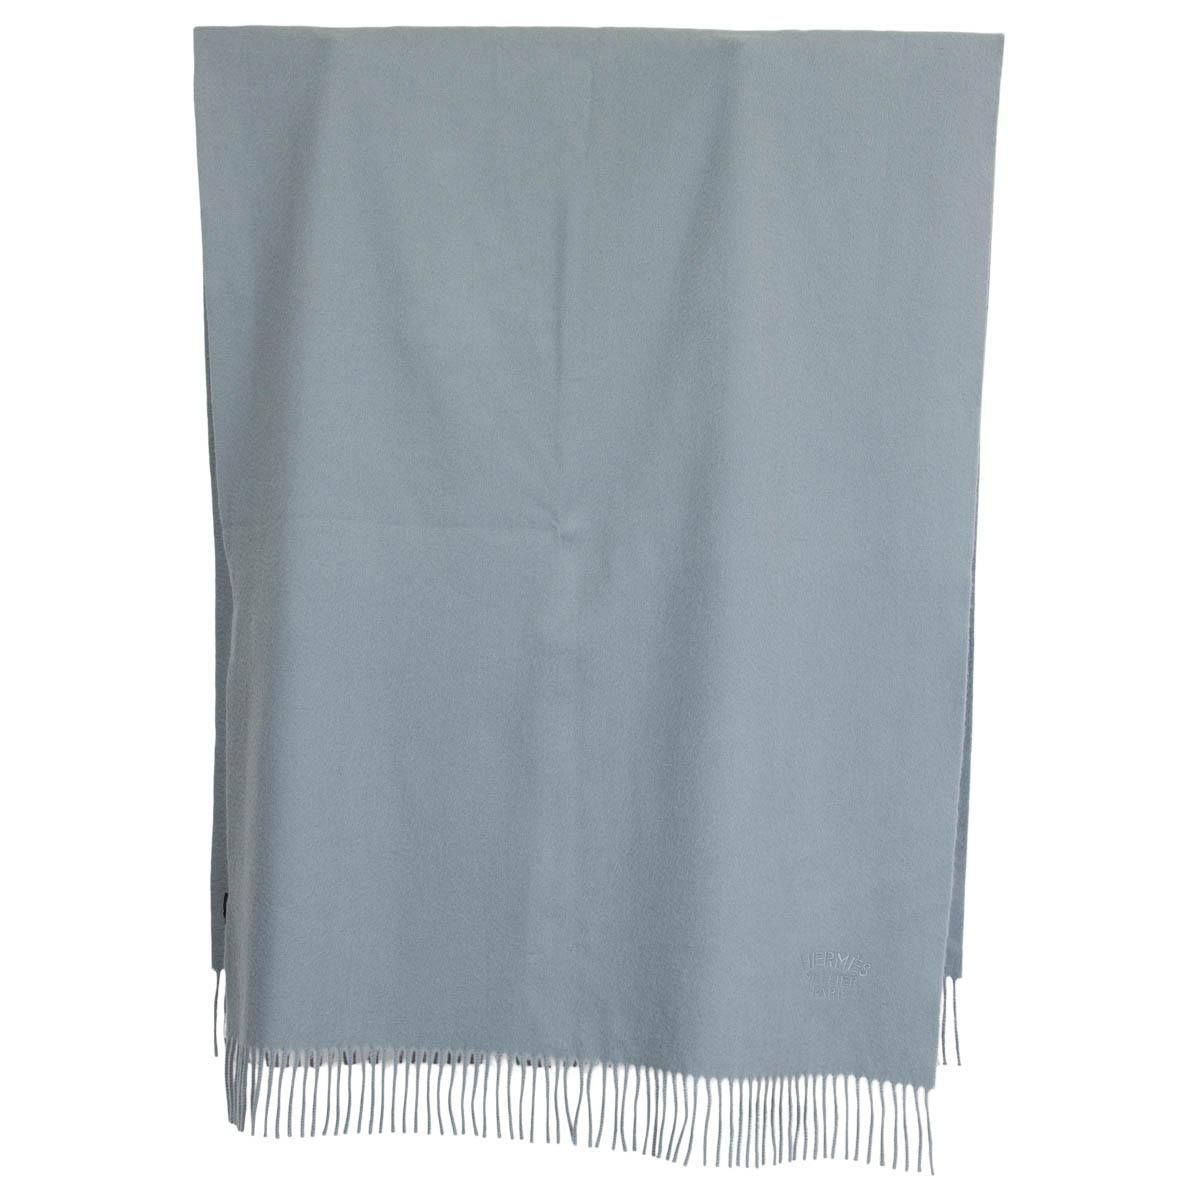 100% authentic Hermès fringed cashmere (100%) shawl in pale light blue. Has been worn and is in excellent condition. 

Measurements
Width	71cm (27.7in)
Length	190cm (74.1in)

All our listings include only the listed item unless otherwise specified